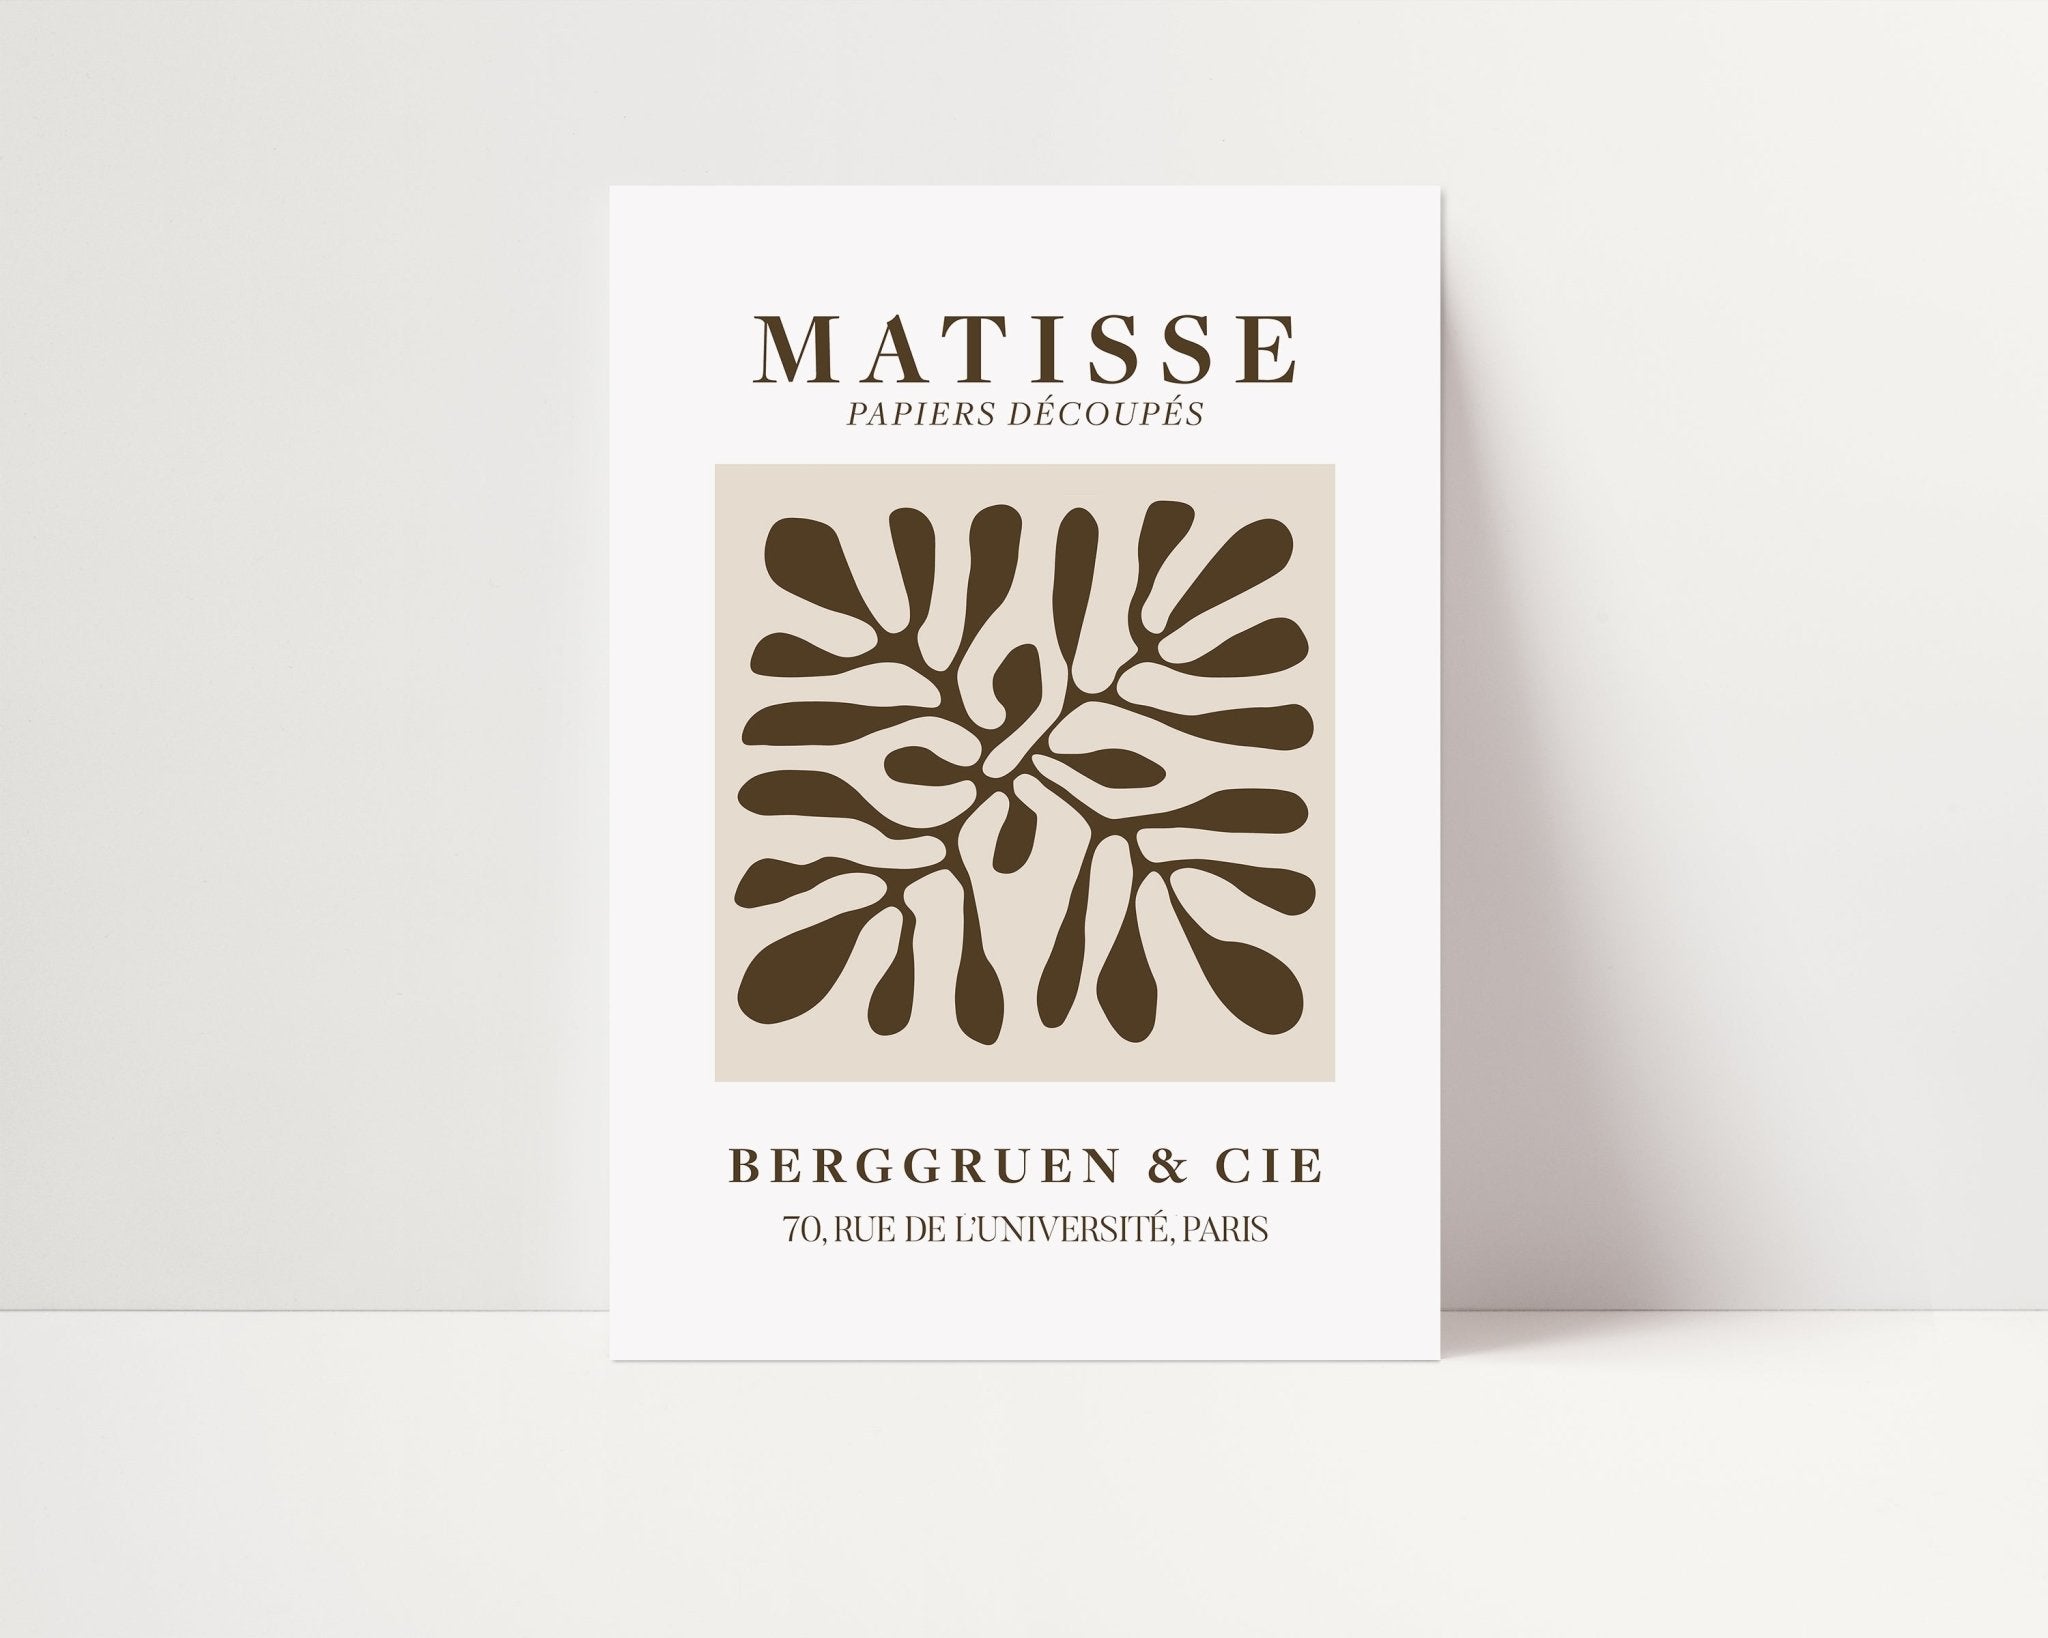 Brown Matisse Cut Outs - D'Luxe Prints